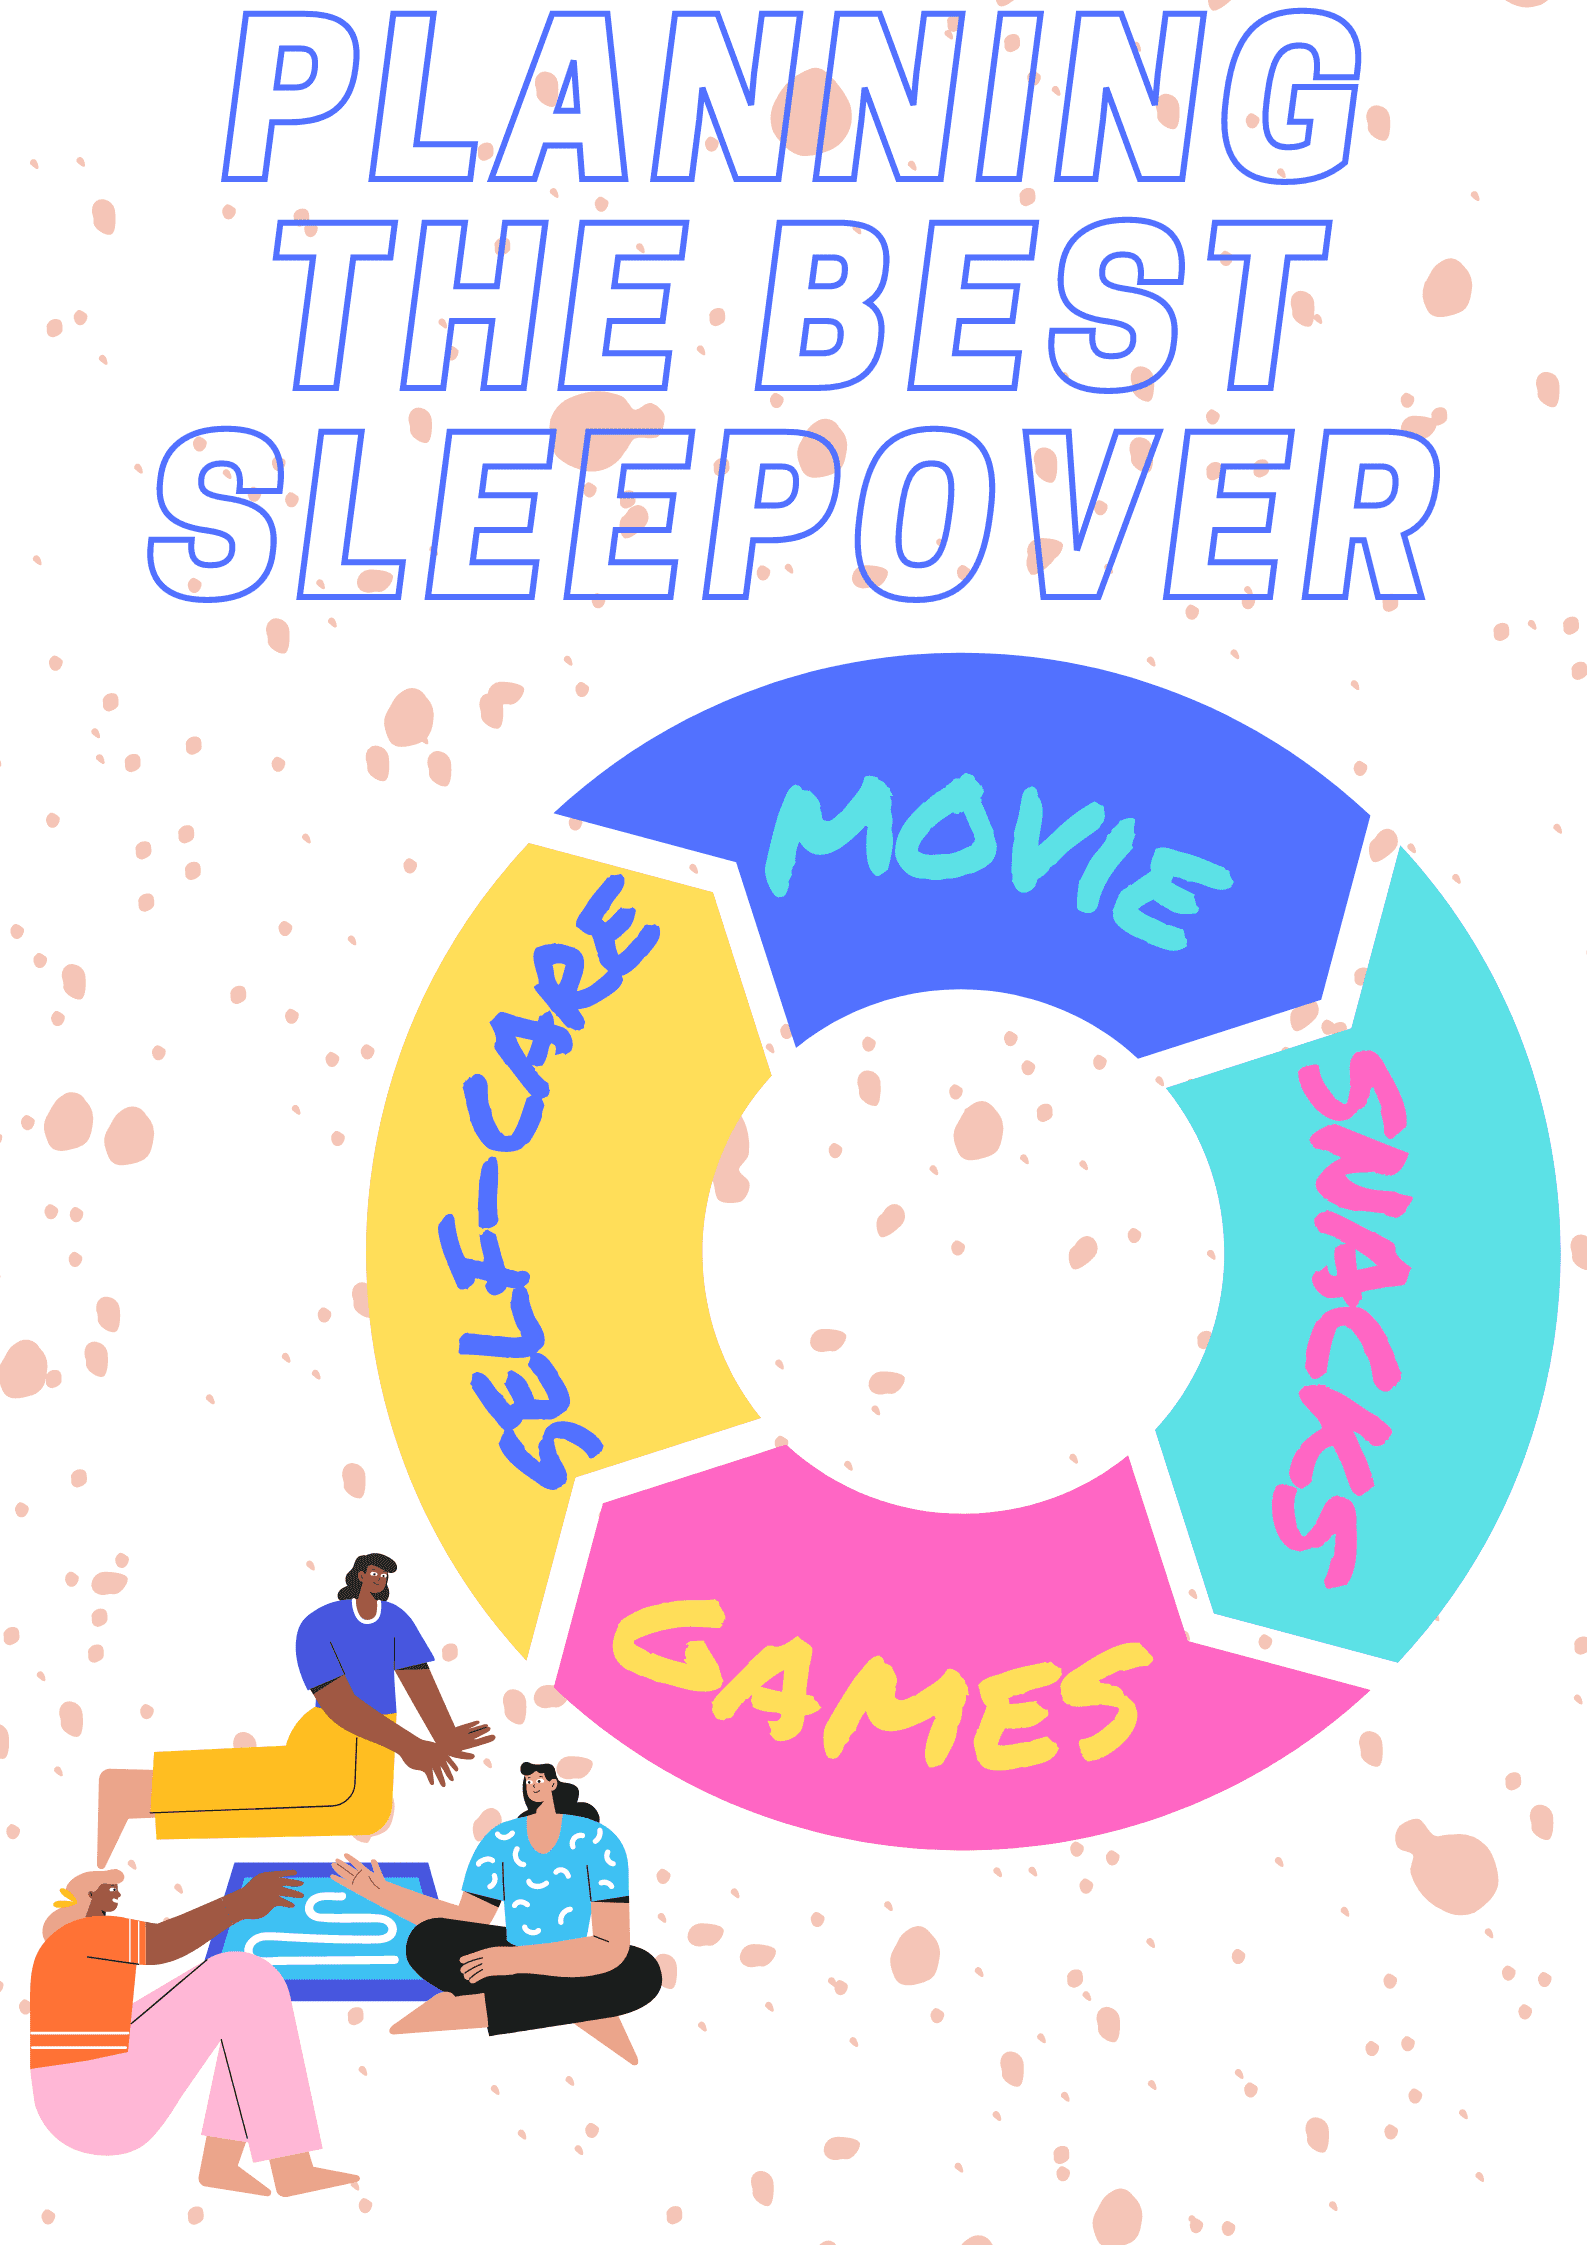 Infographic on how to plan the best sleepover.